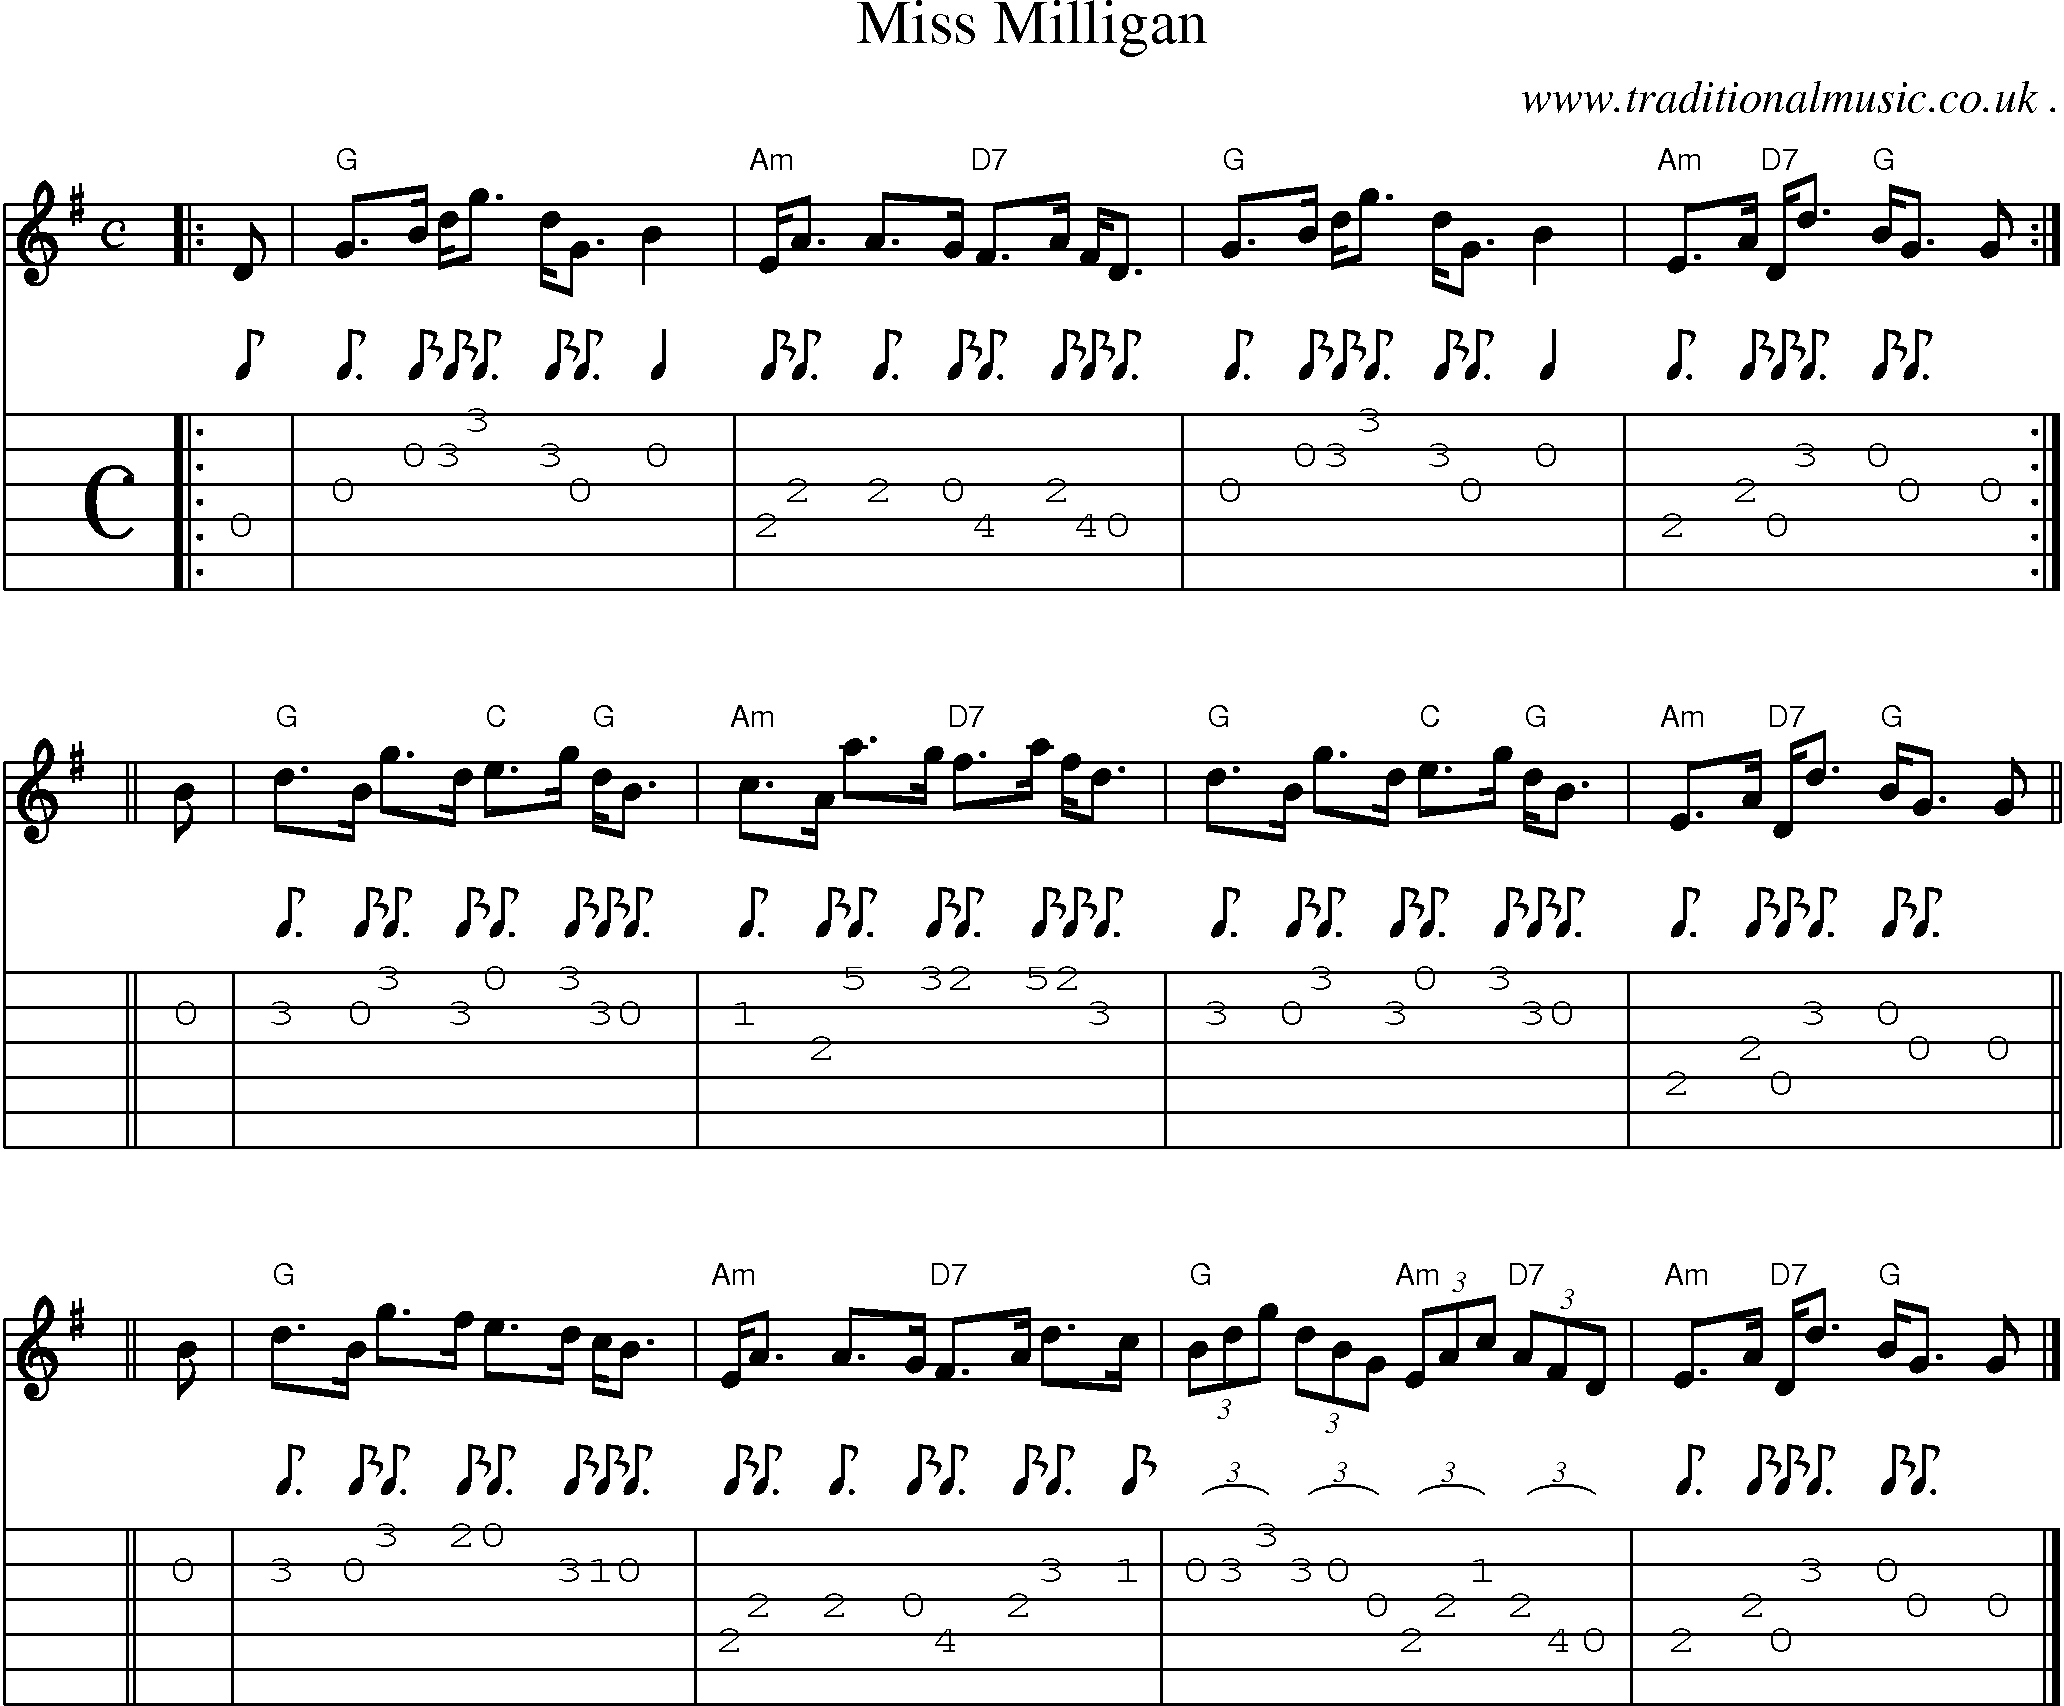 Sheet-music  score, Chords and Guitar Tabs for Miss Milligan